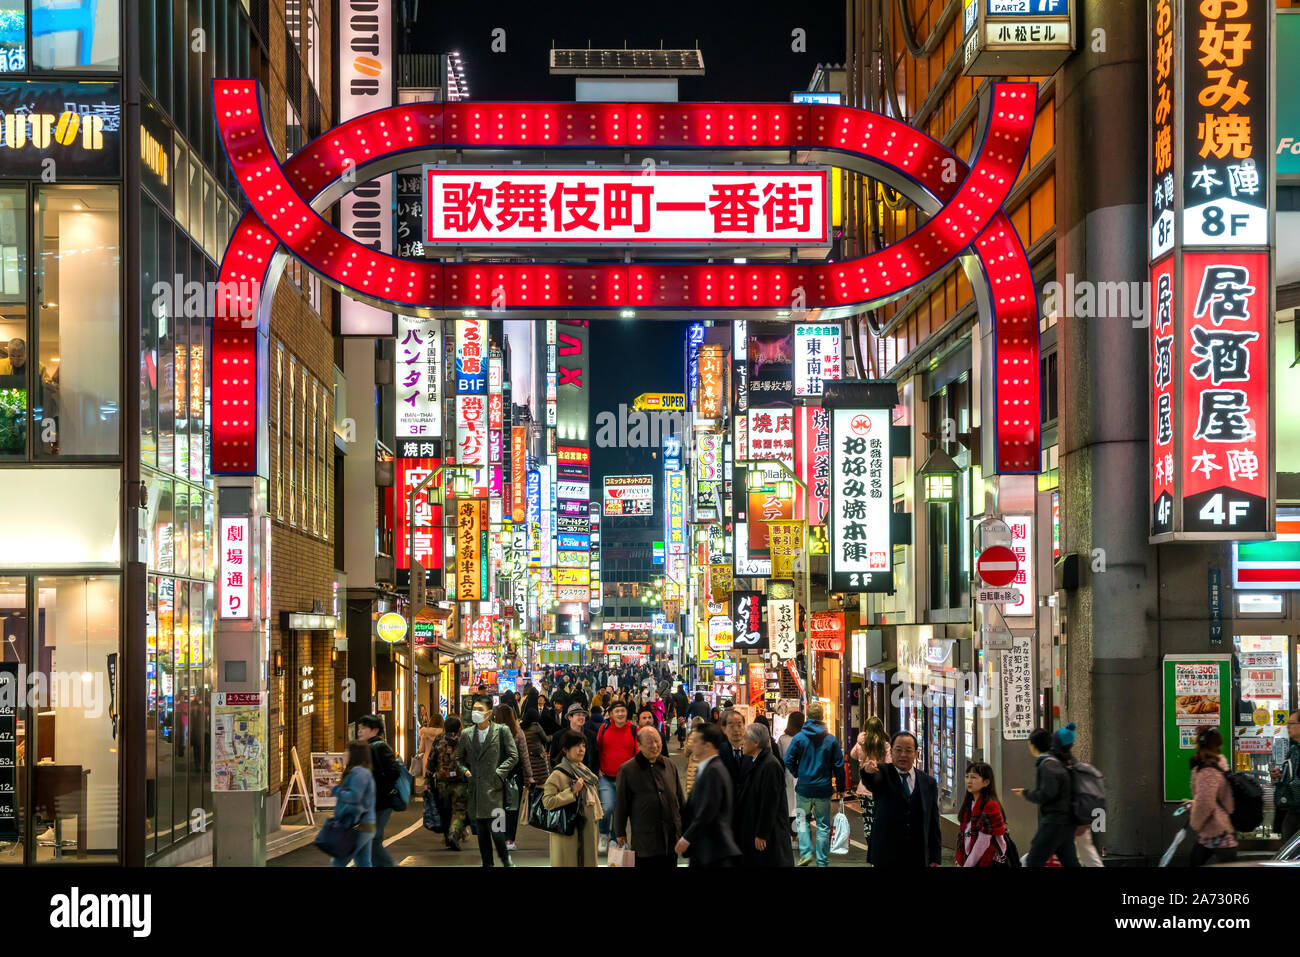 Tokyo, Japan - APRIL 3, 2017 : Nightlife in Shinjuku. Shinjuku is one of Tokyo's business districts with many international corporate headquarters loc Stock Photo